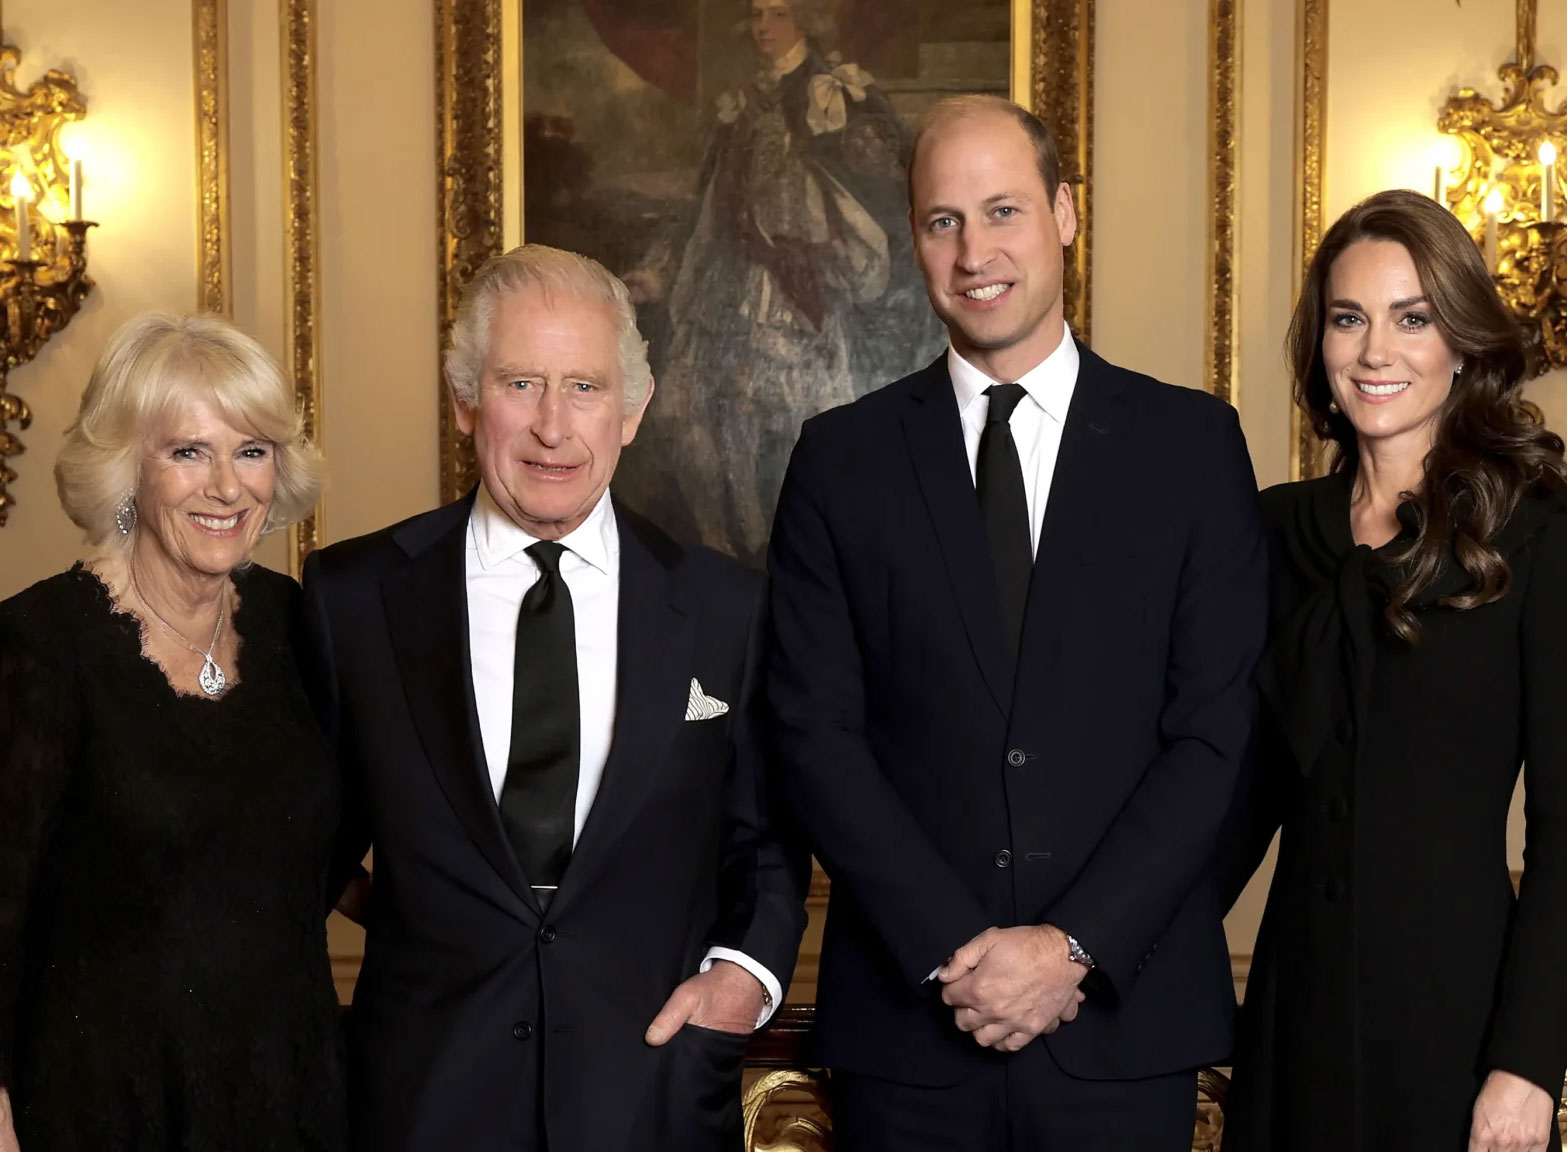 photograph of King Charles III, Queen Camilla, and the Prince and Princess of Wales, William and Catherine